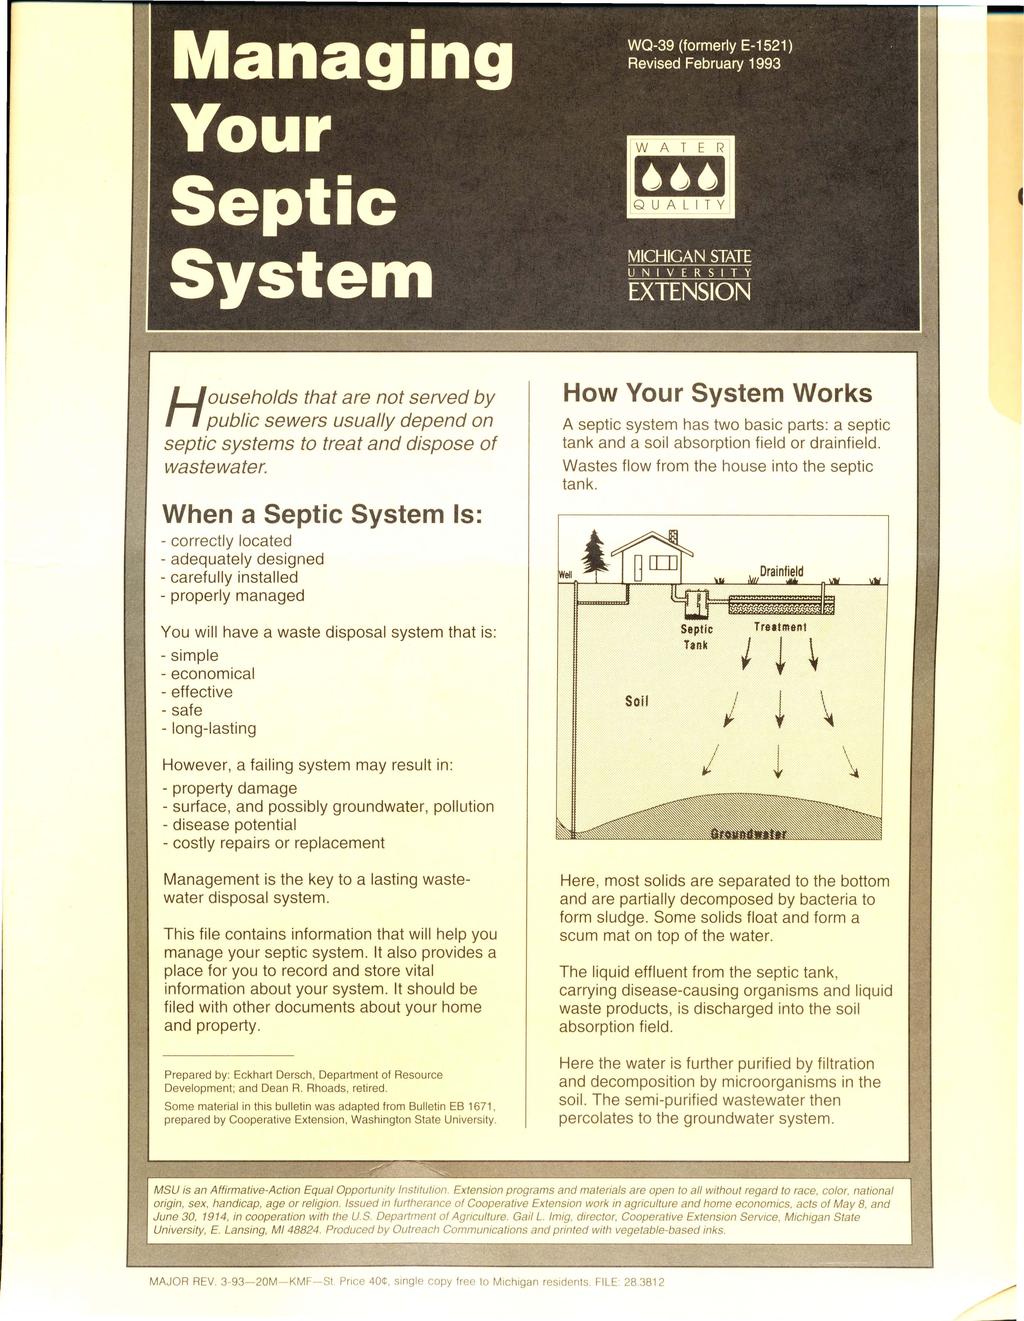 H ouseholds that are not served by public sewers usually depend on septic systems to treat and dispose of wastewater.